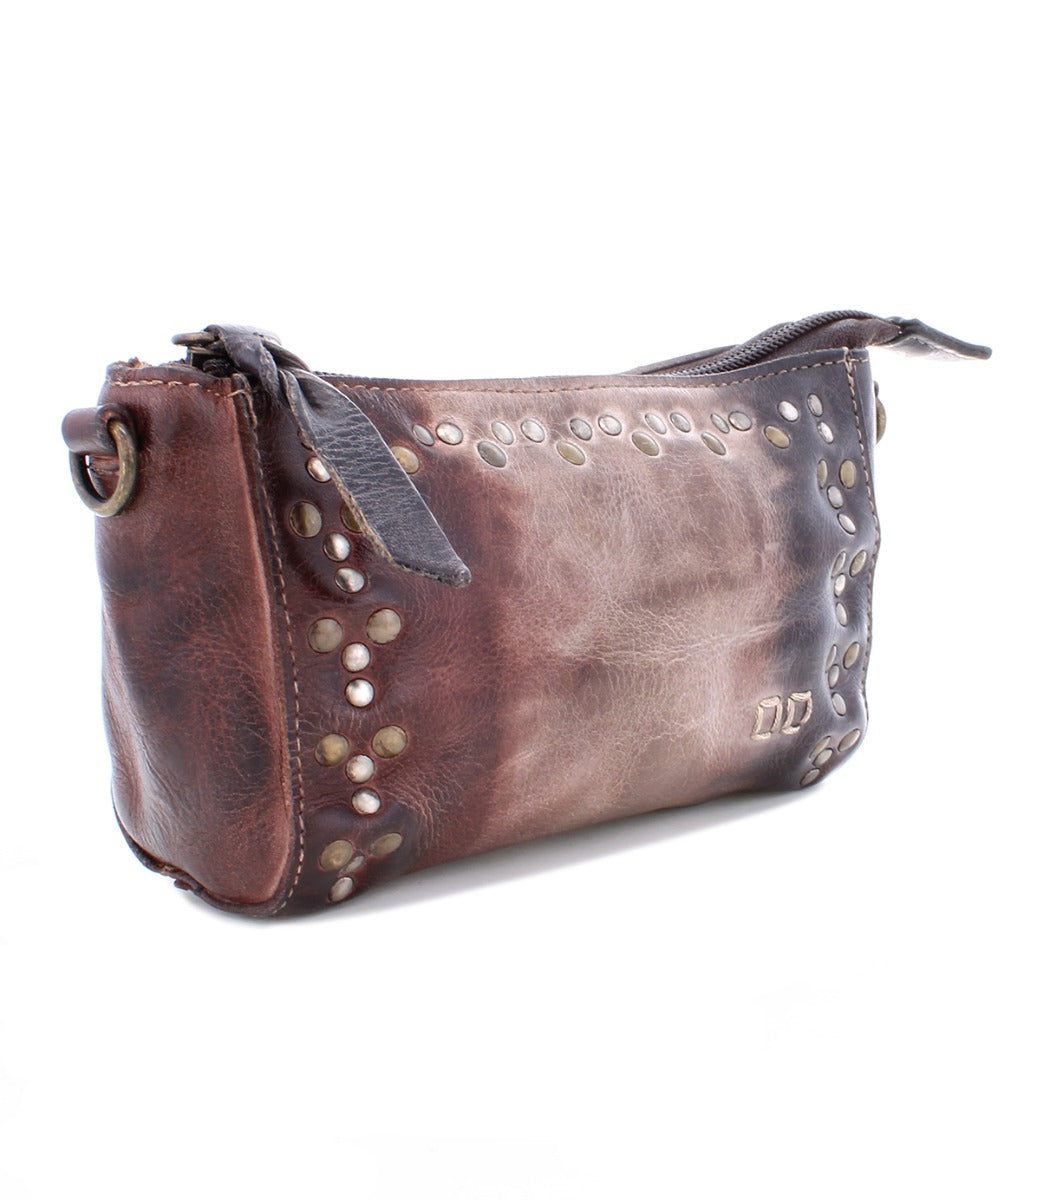 An Encase by Bed Stu brown leather purse with studded details.